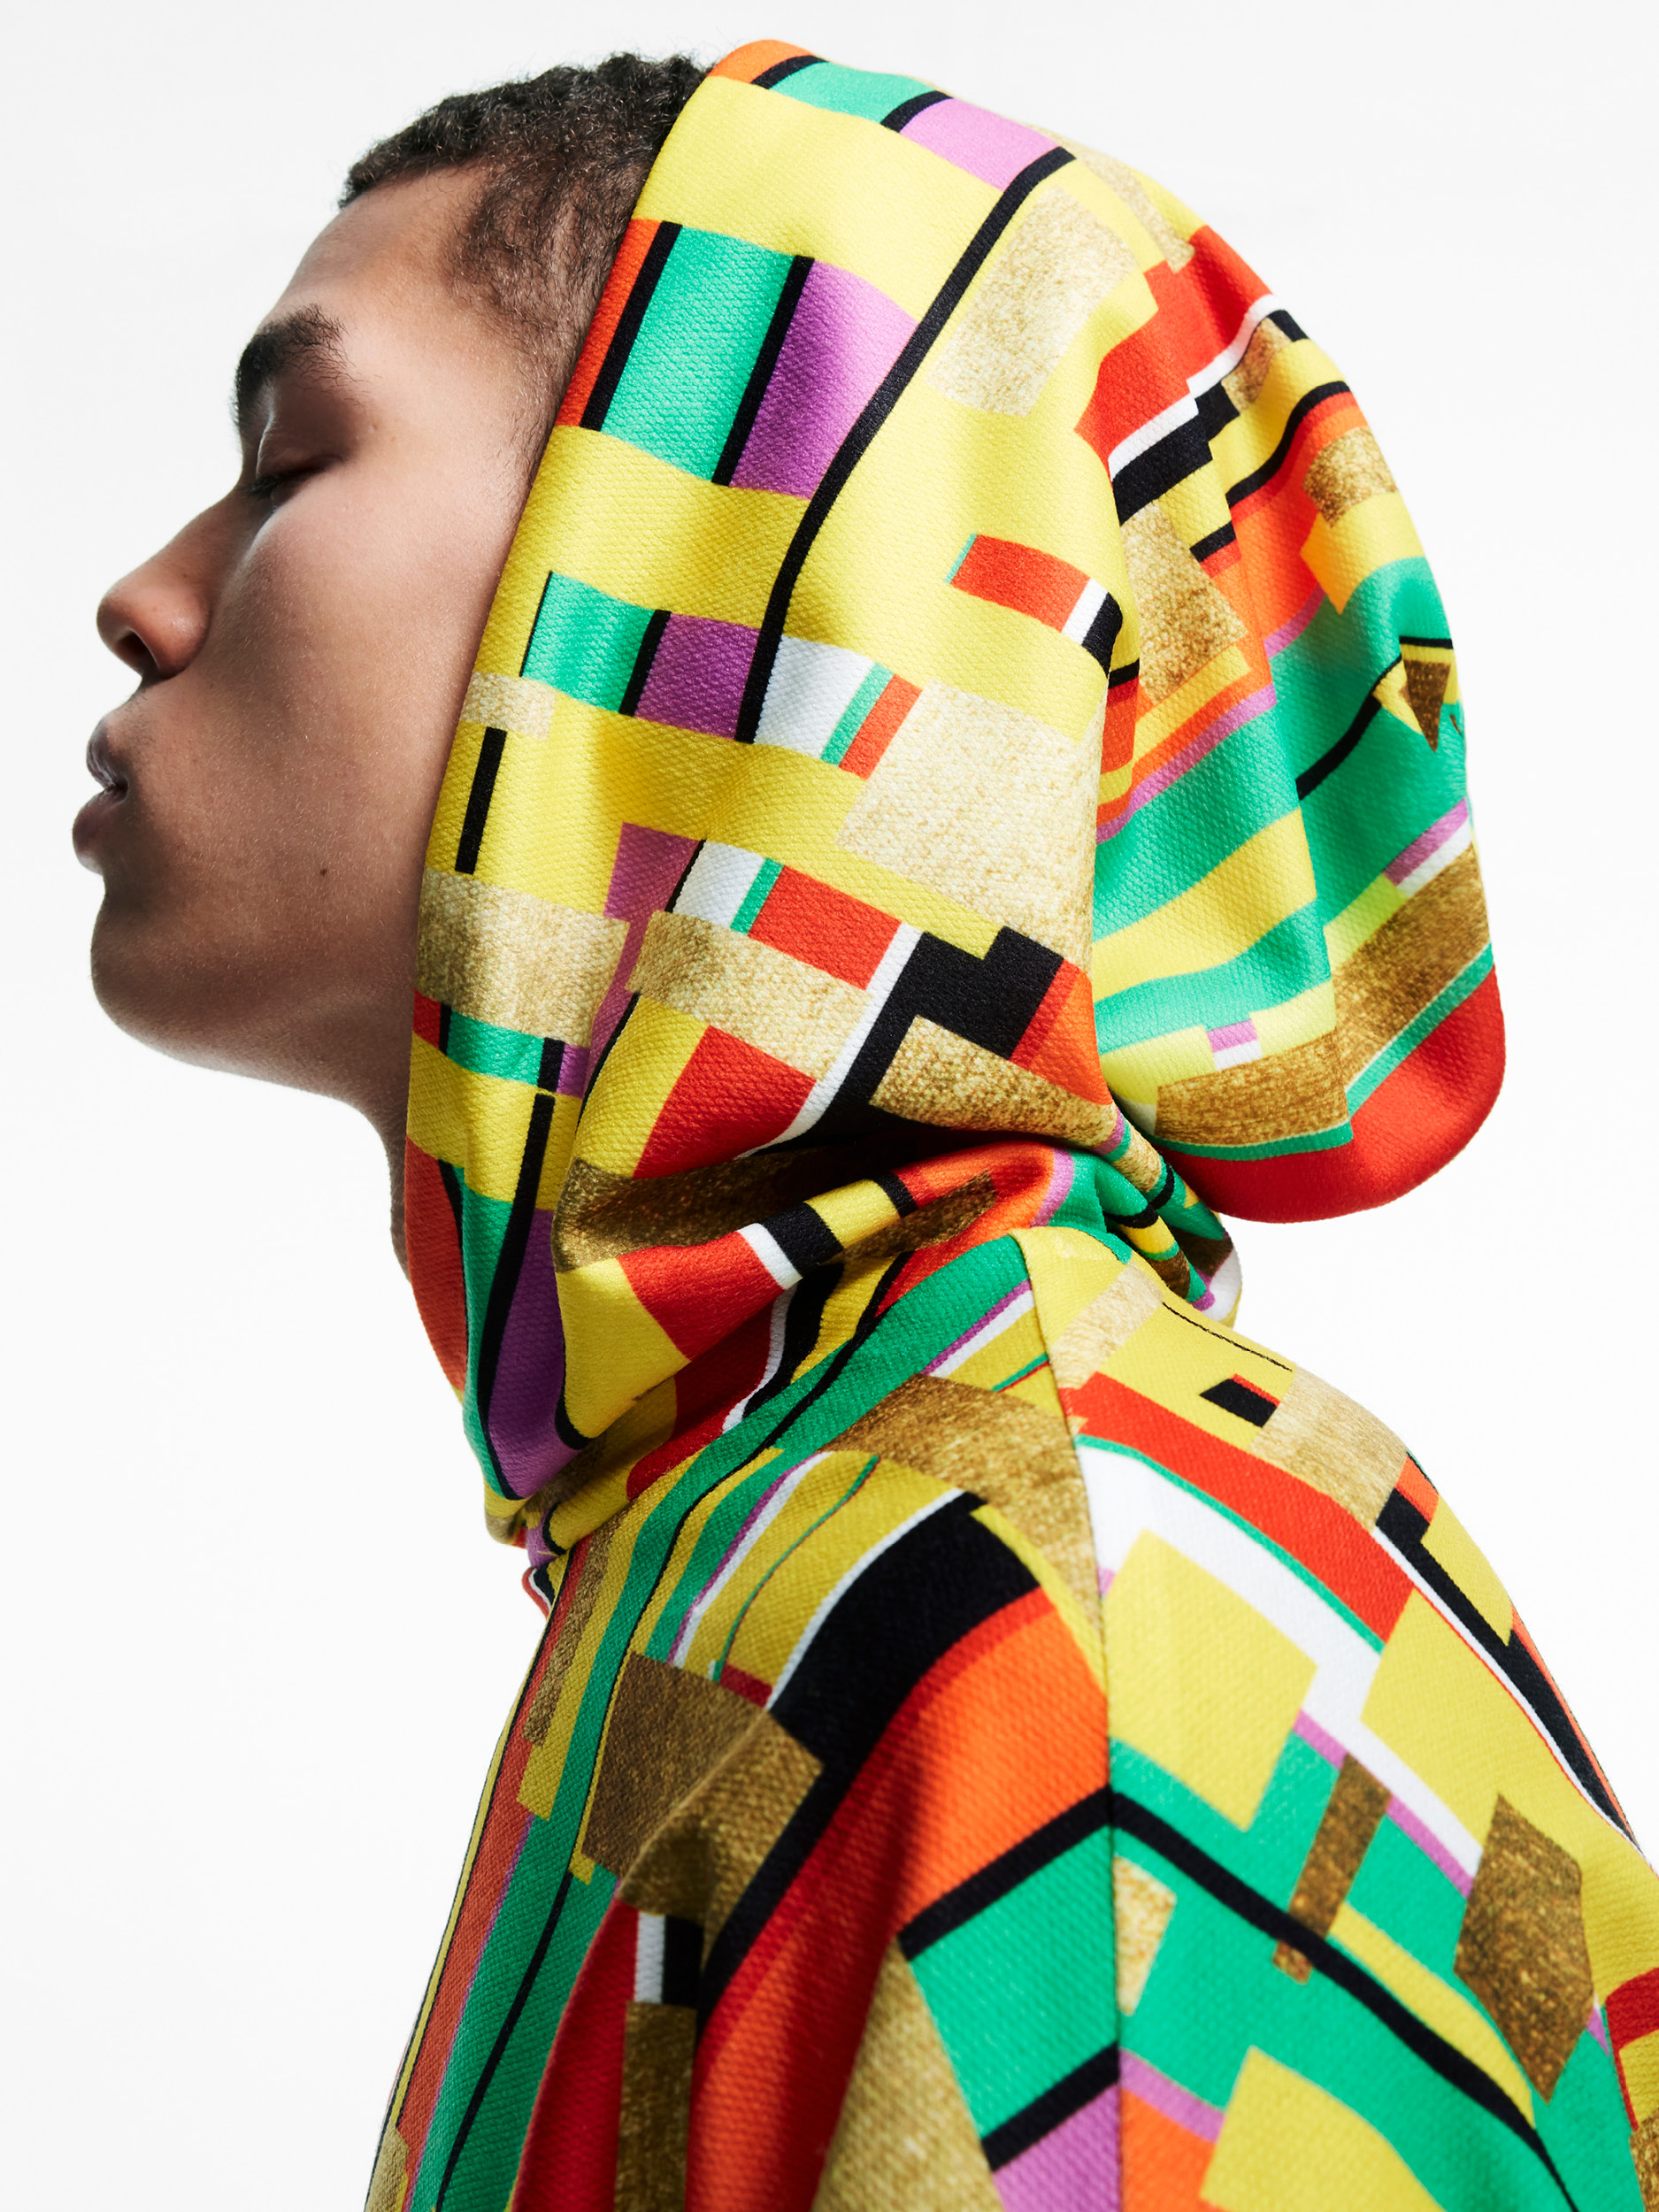 ASOS Launch ‘Made in Kenya’ Collection